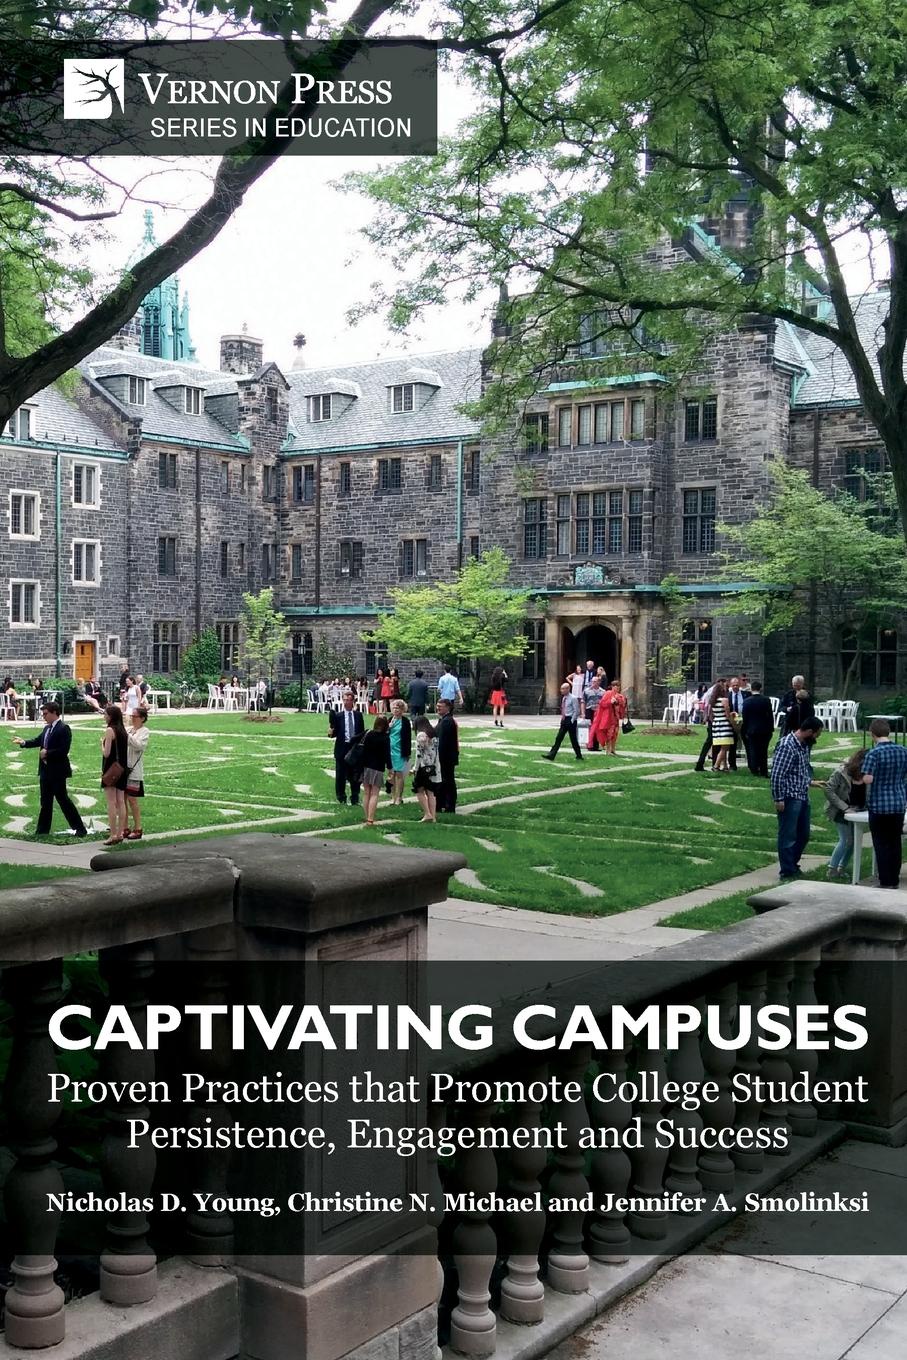 Captivating Campuses. Proven Practices that Promote College Student Persistence, Engagement and Success